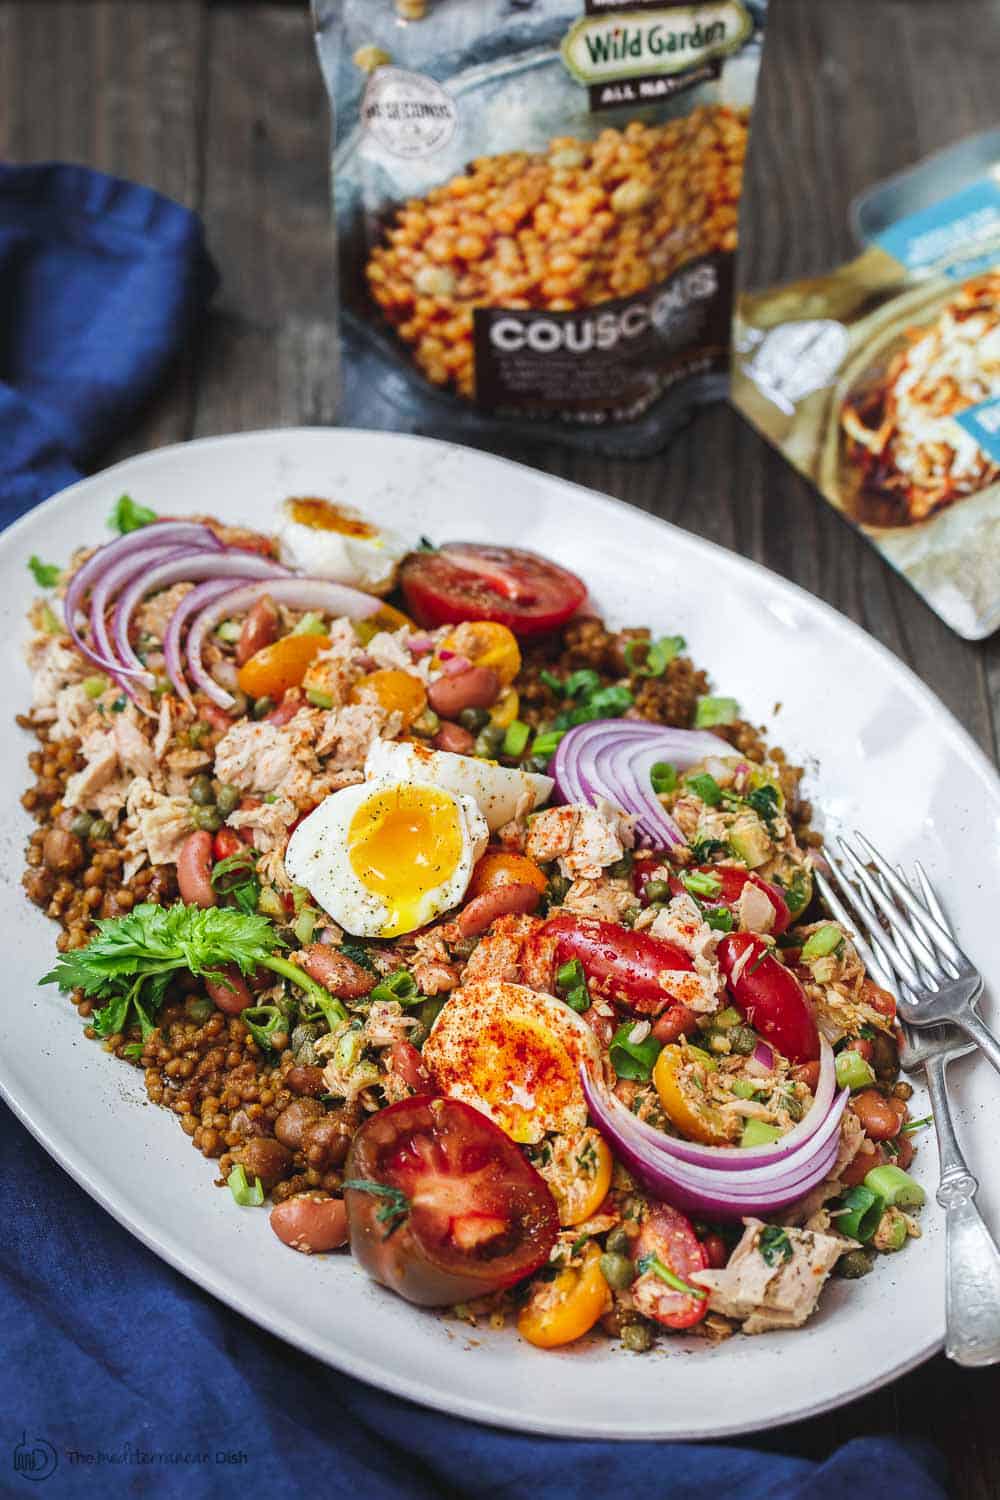 Tuna Couscous Salad Recipe | The Mediterranean Dish. Canned tuna takes on an Italian twist with kindey beans, fresh veggies, capers and more! Add heat and ready couscous pilaf from @wildgardenfoods for an easy weeknight dinner! See the full recipe on TheMediterraneanDish.com